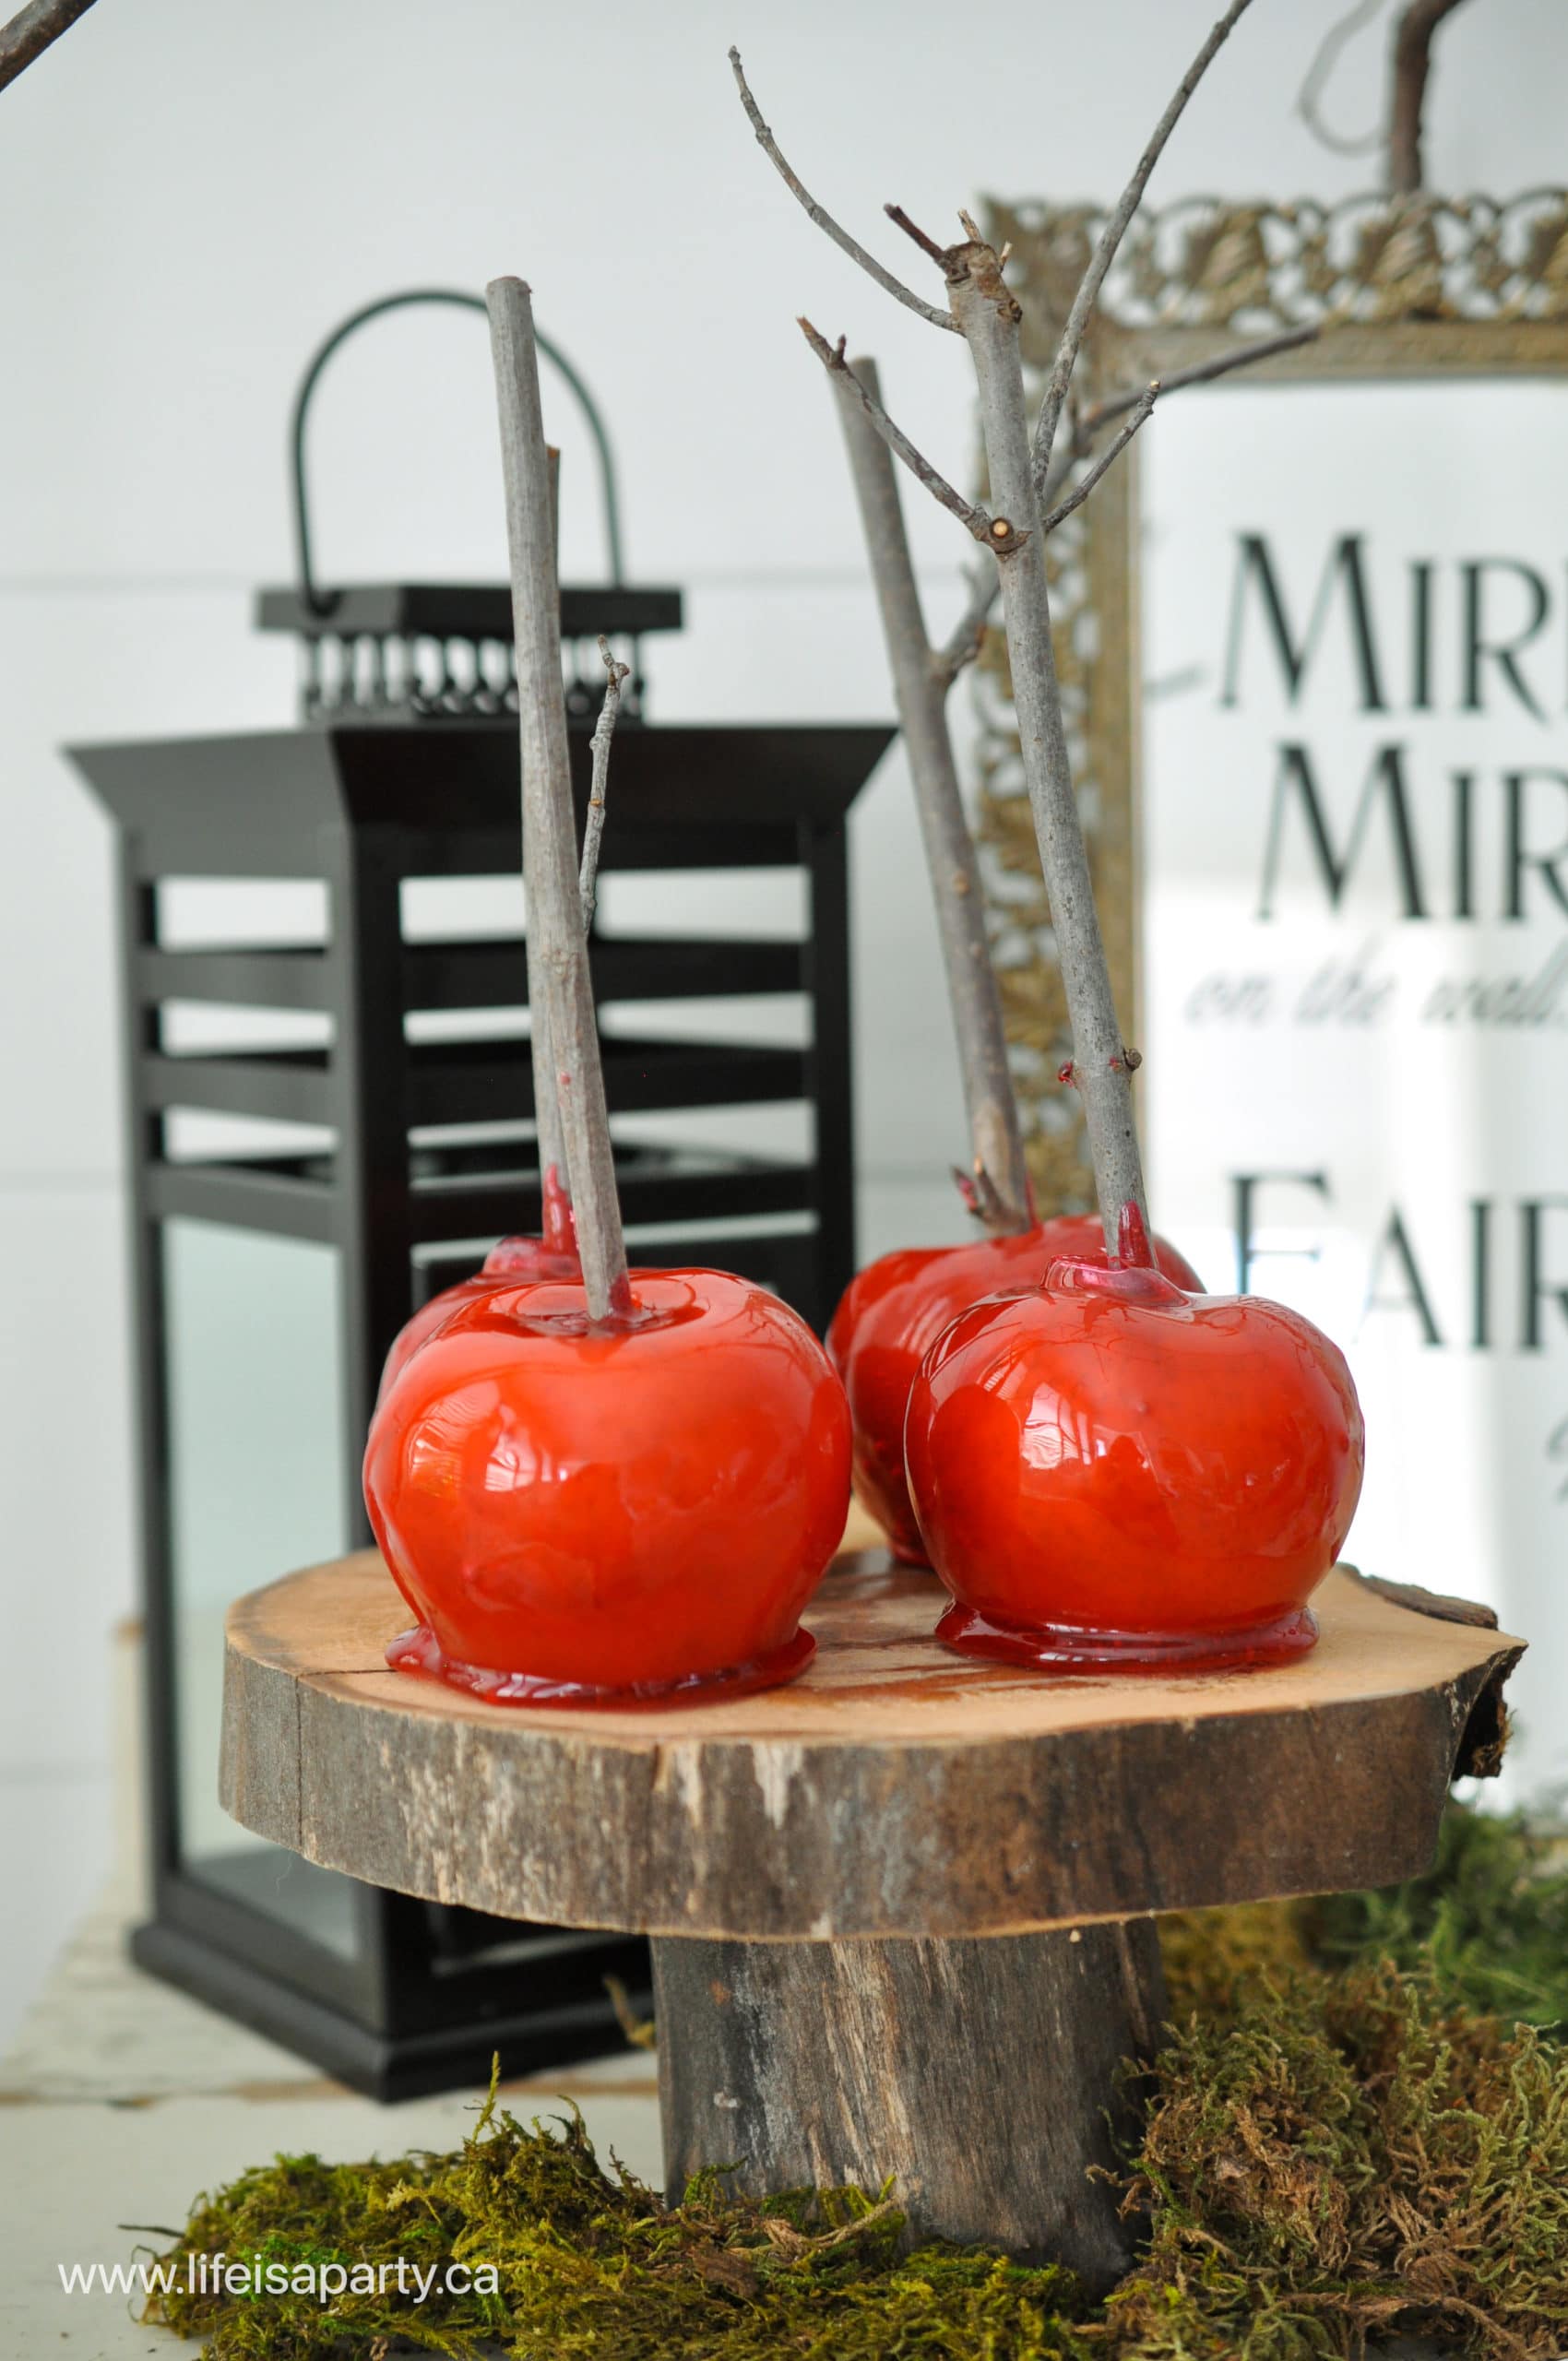 Snow White candy apples